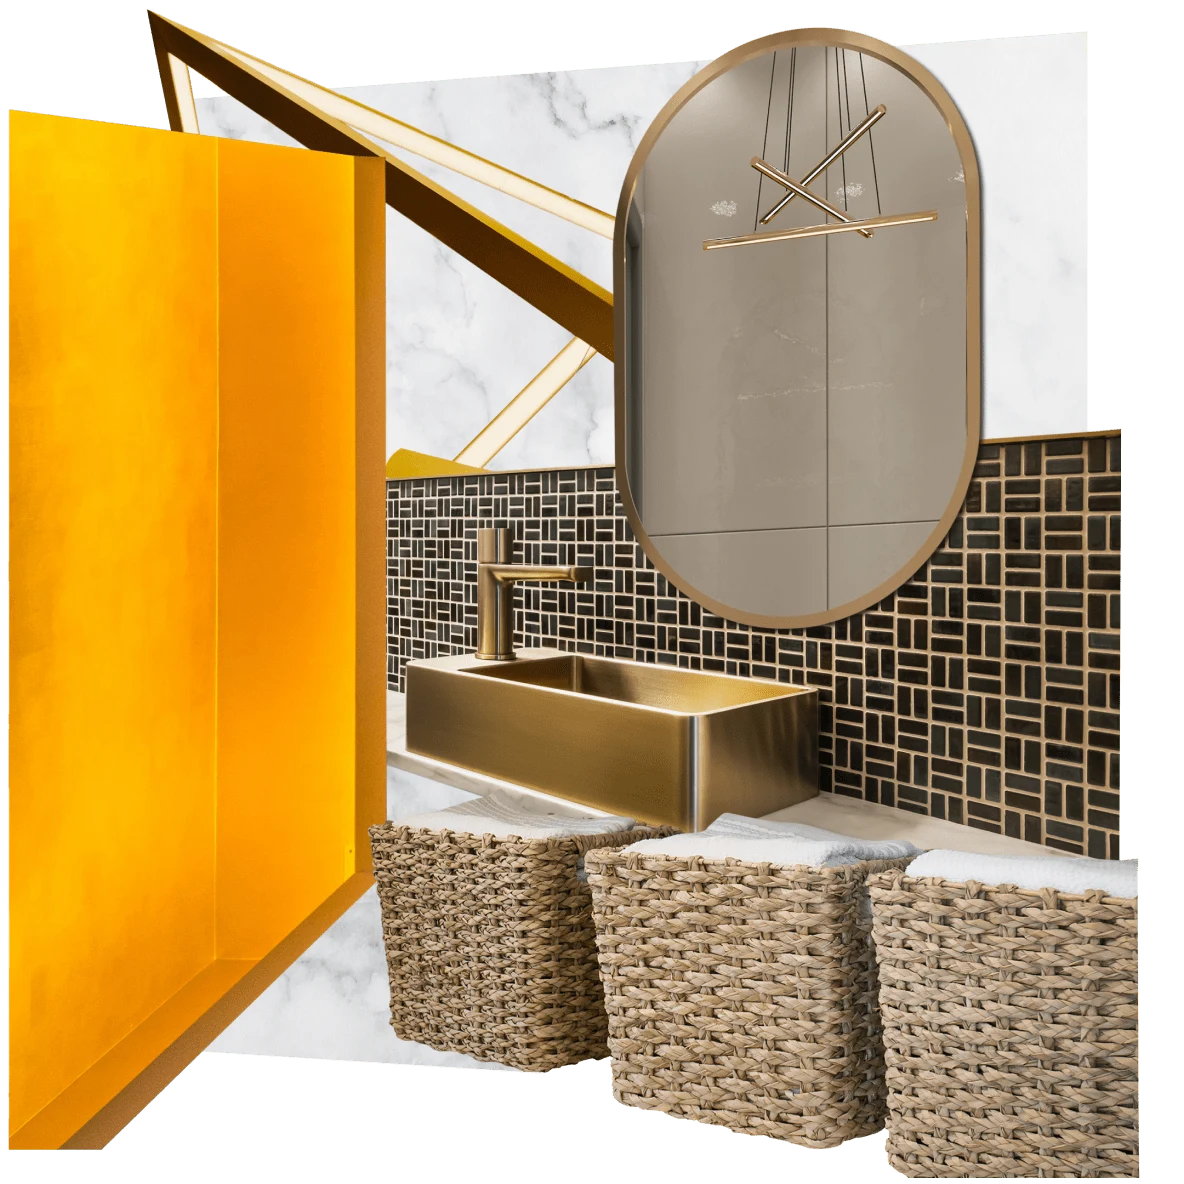 Collage of modern laundry room items: wicker laundry baskets, a black and gold tiled wall with square golden sink, a rounded mirror angling out from behind an orange wall.